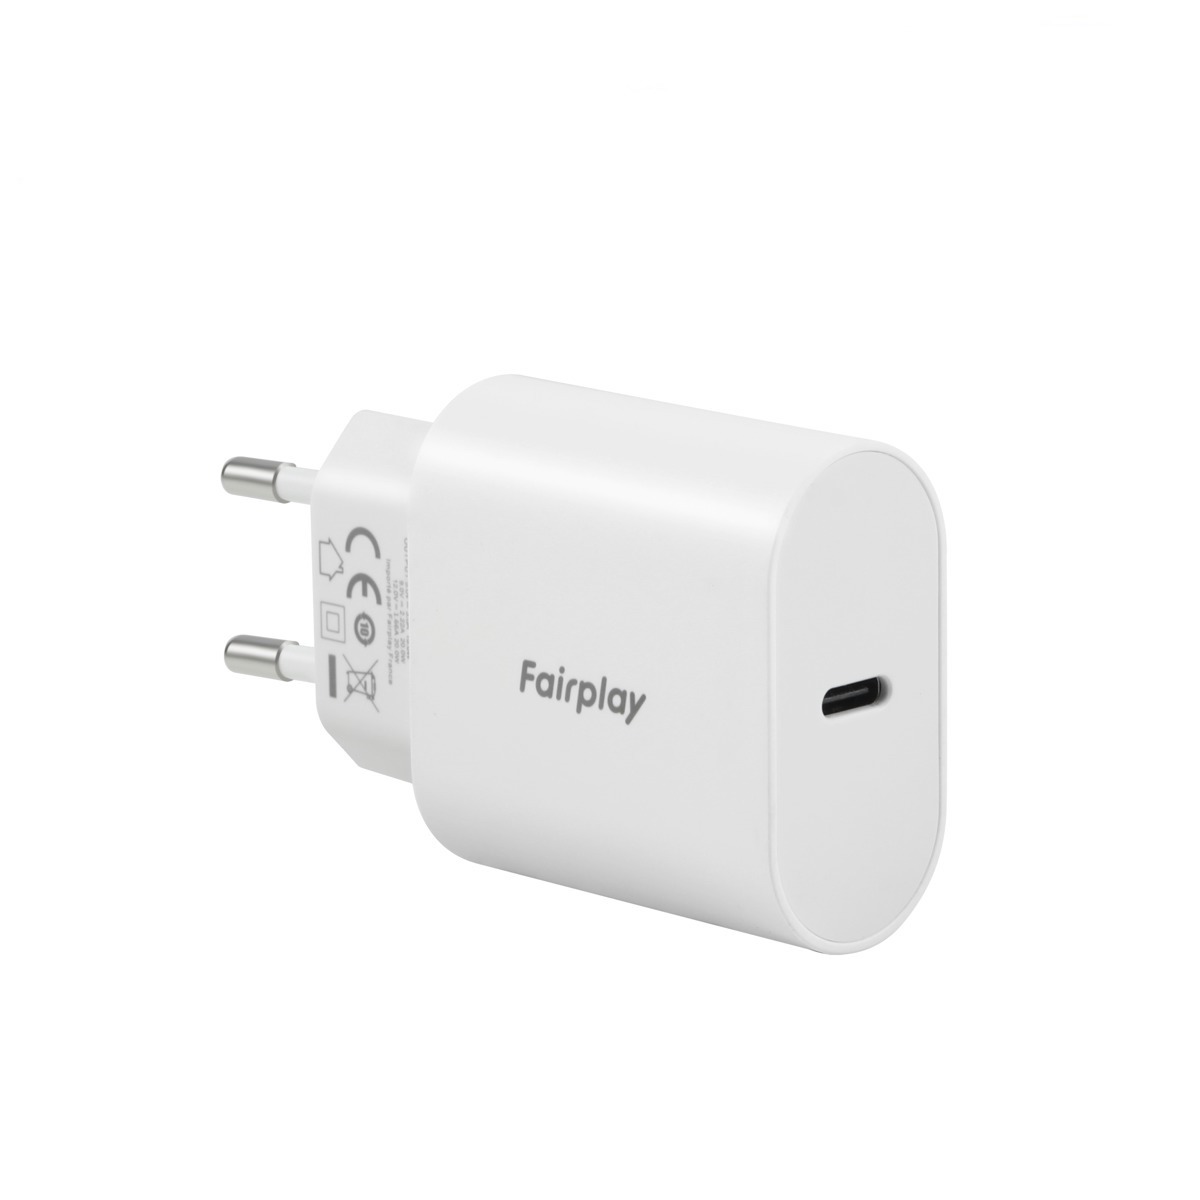 Combo Smartphone chargeur voiture + câble - Fairplay